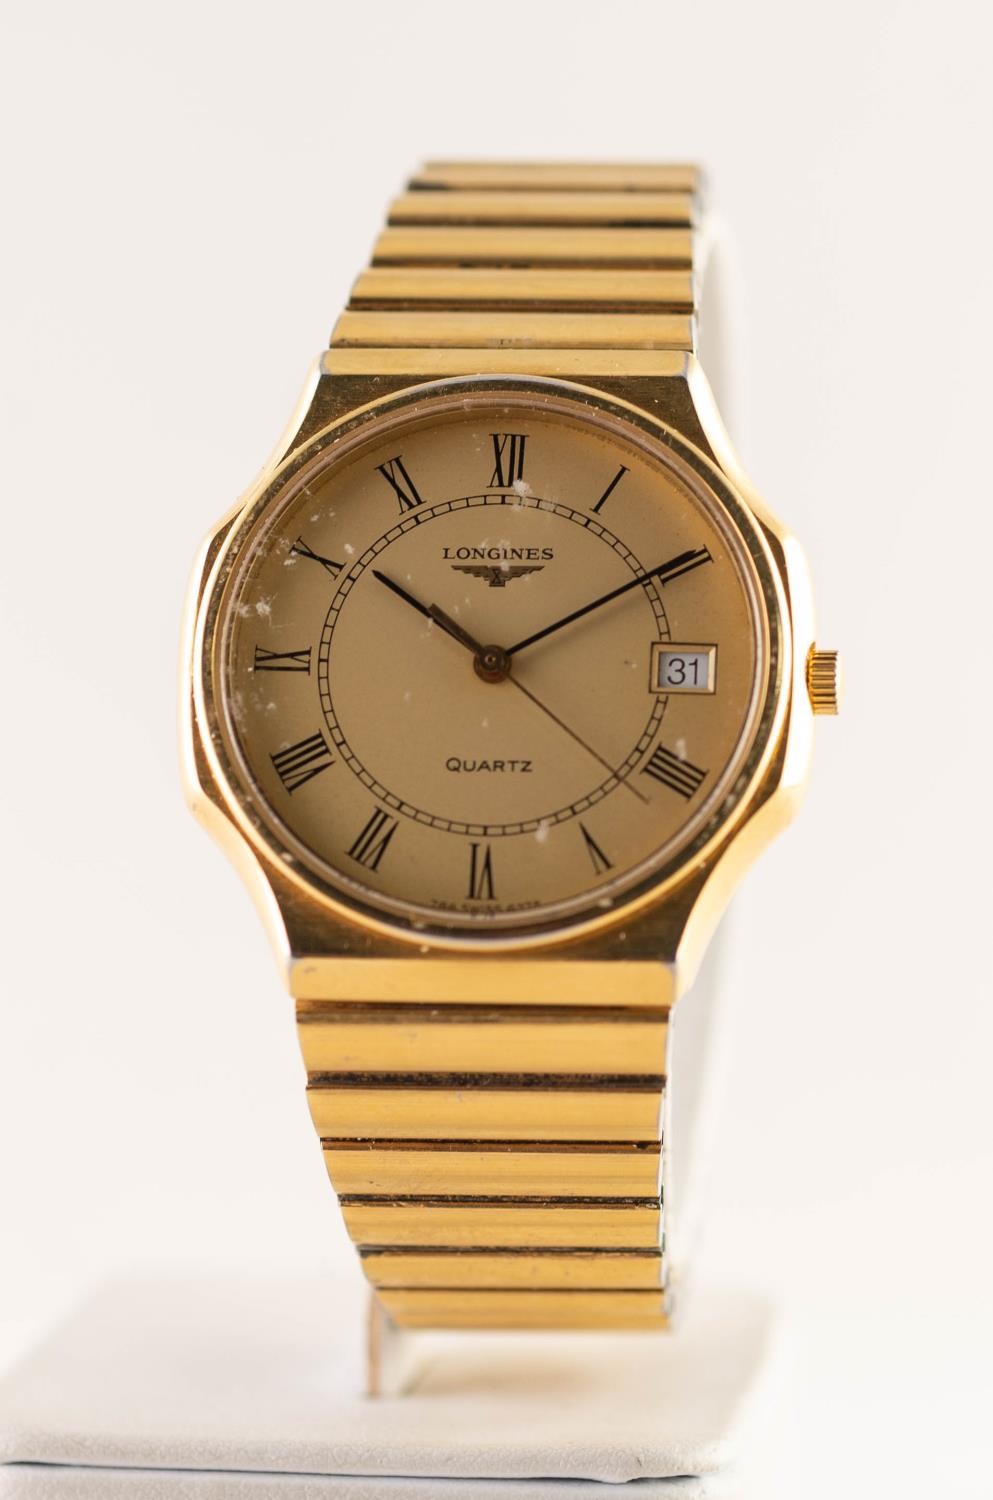 GENT'S LONGINES QUARTZ GOLD PLATED WRISTWATCH with integral strap, roman dial with centre seconds